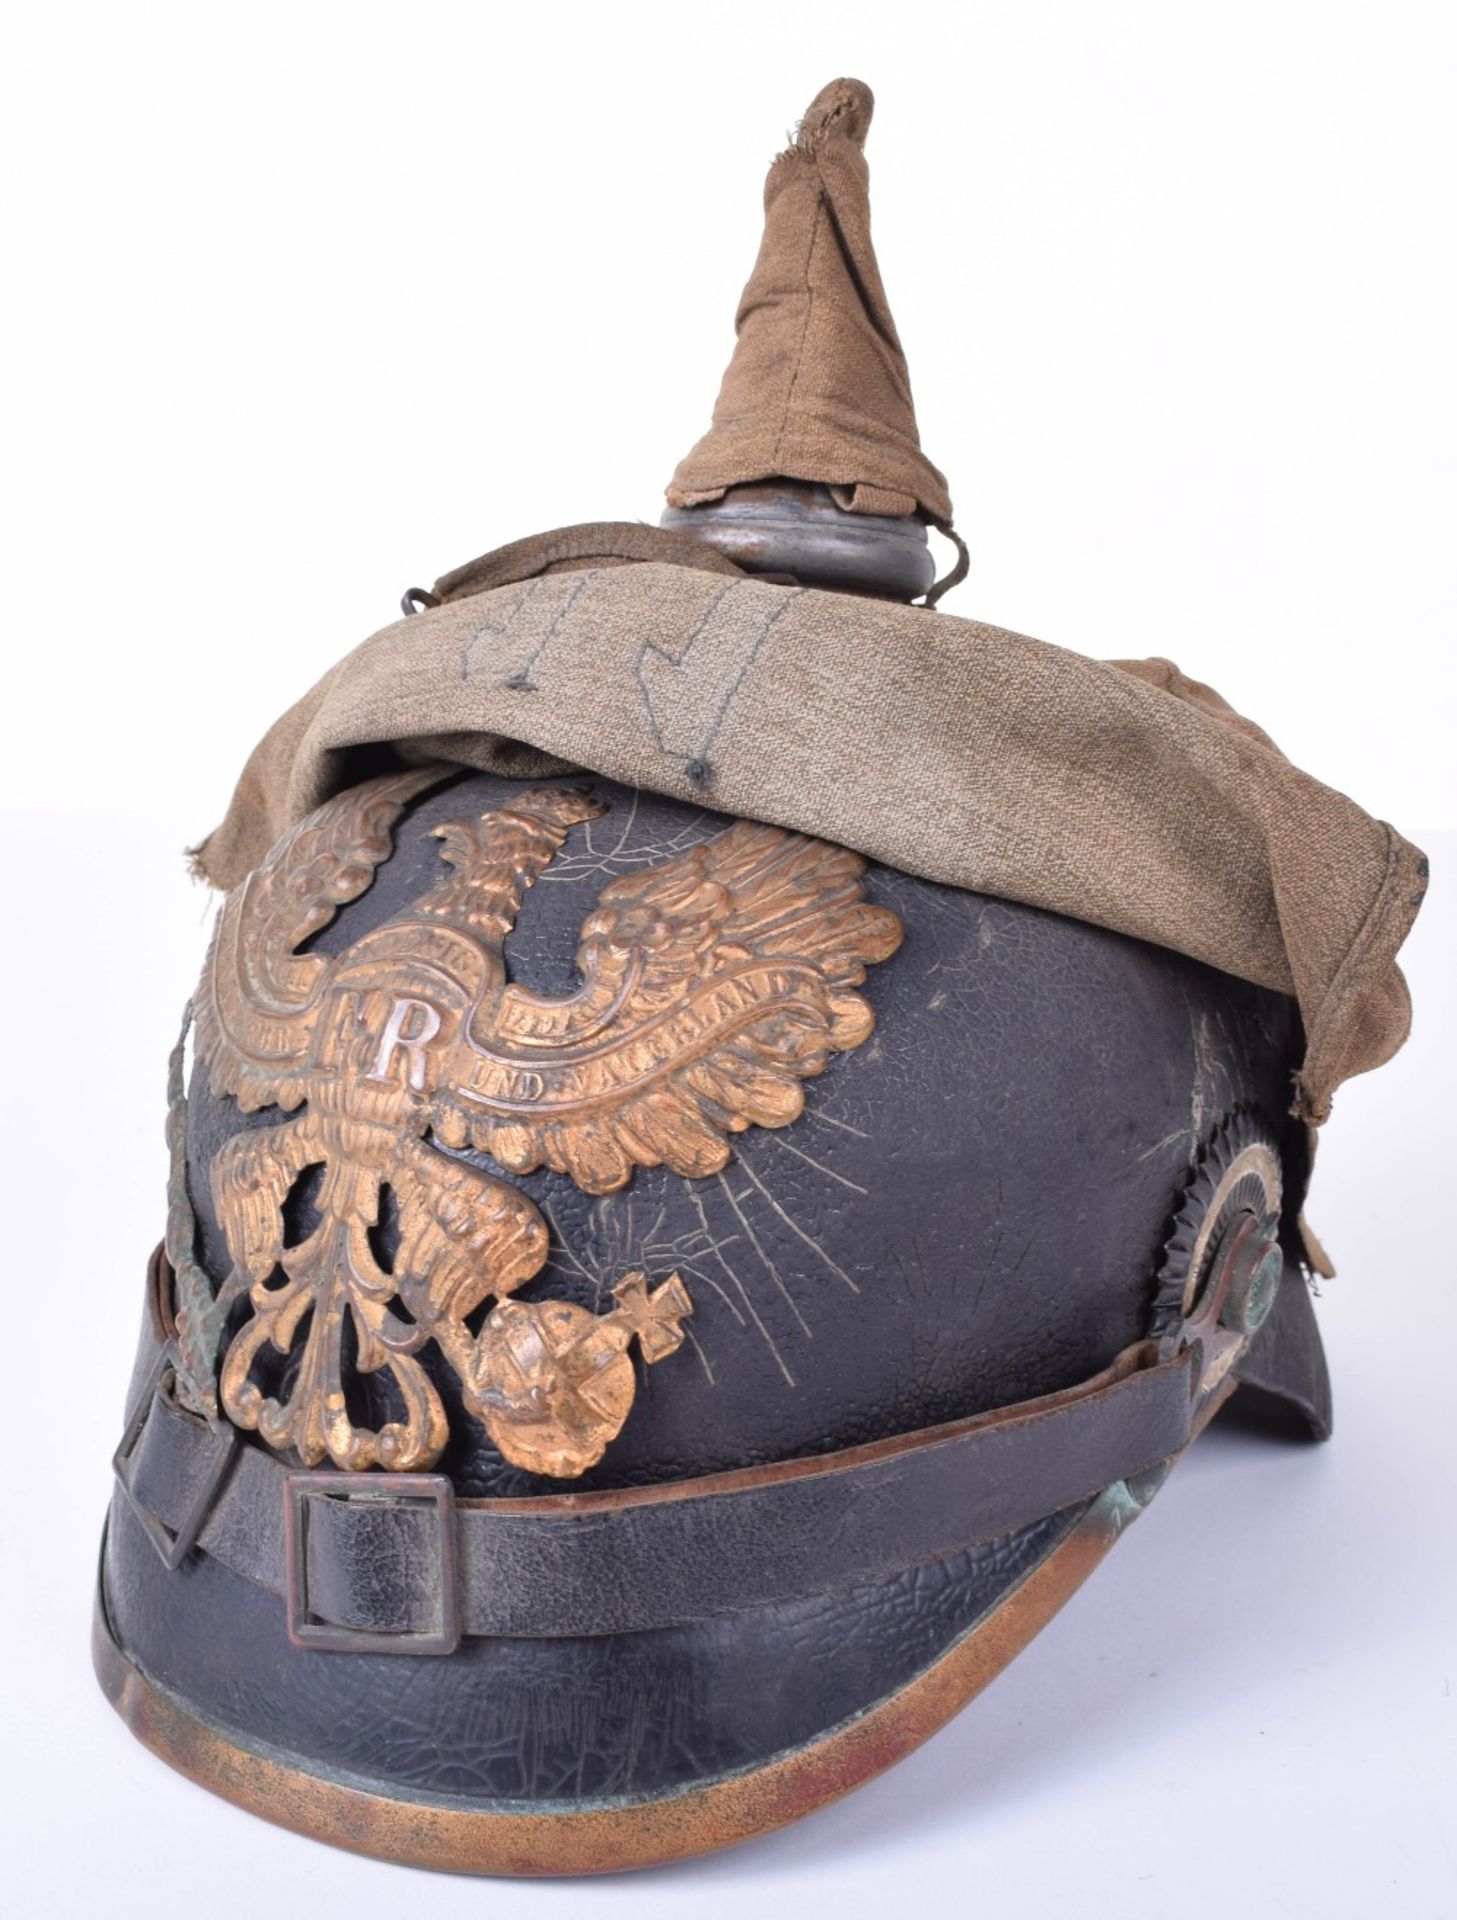 Battlefield Pick-Up Prussian Enlisted Mans Pickelhaube with an Original Numbered Field Cover - Image 7 of 30